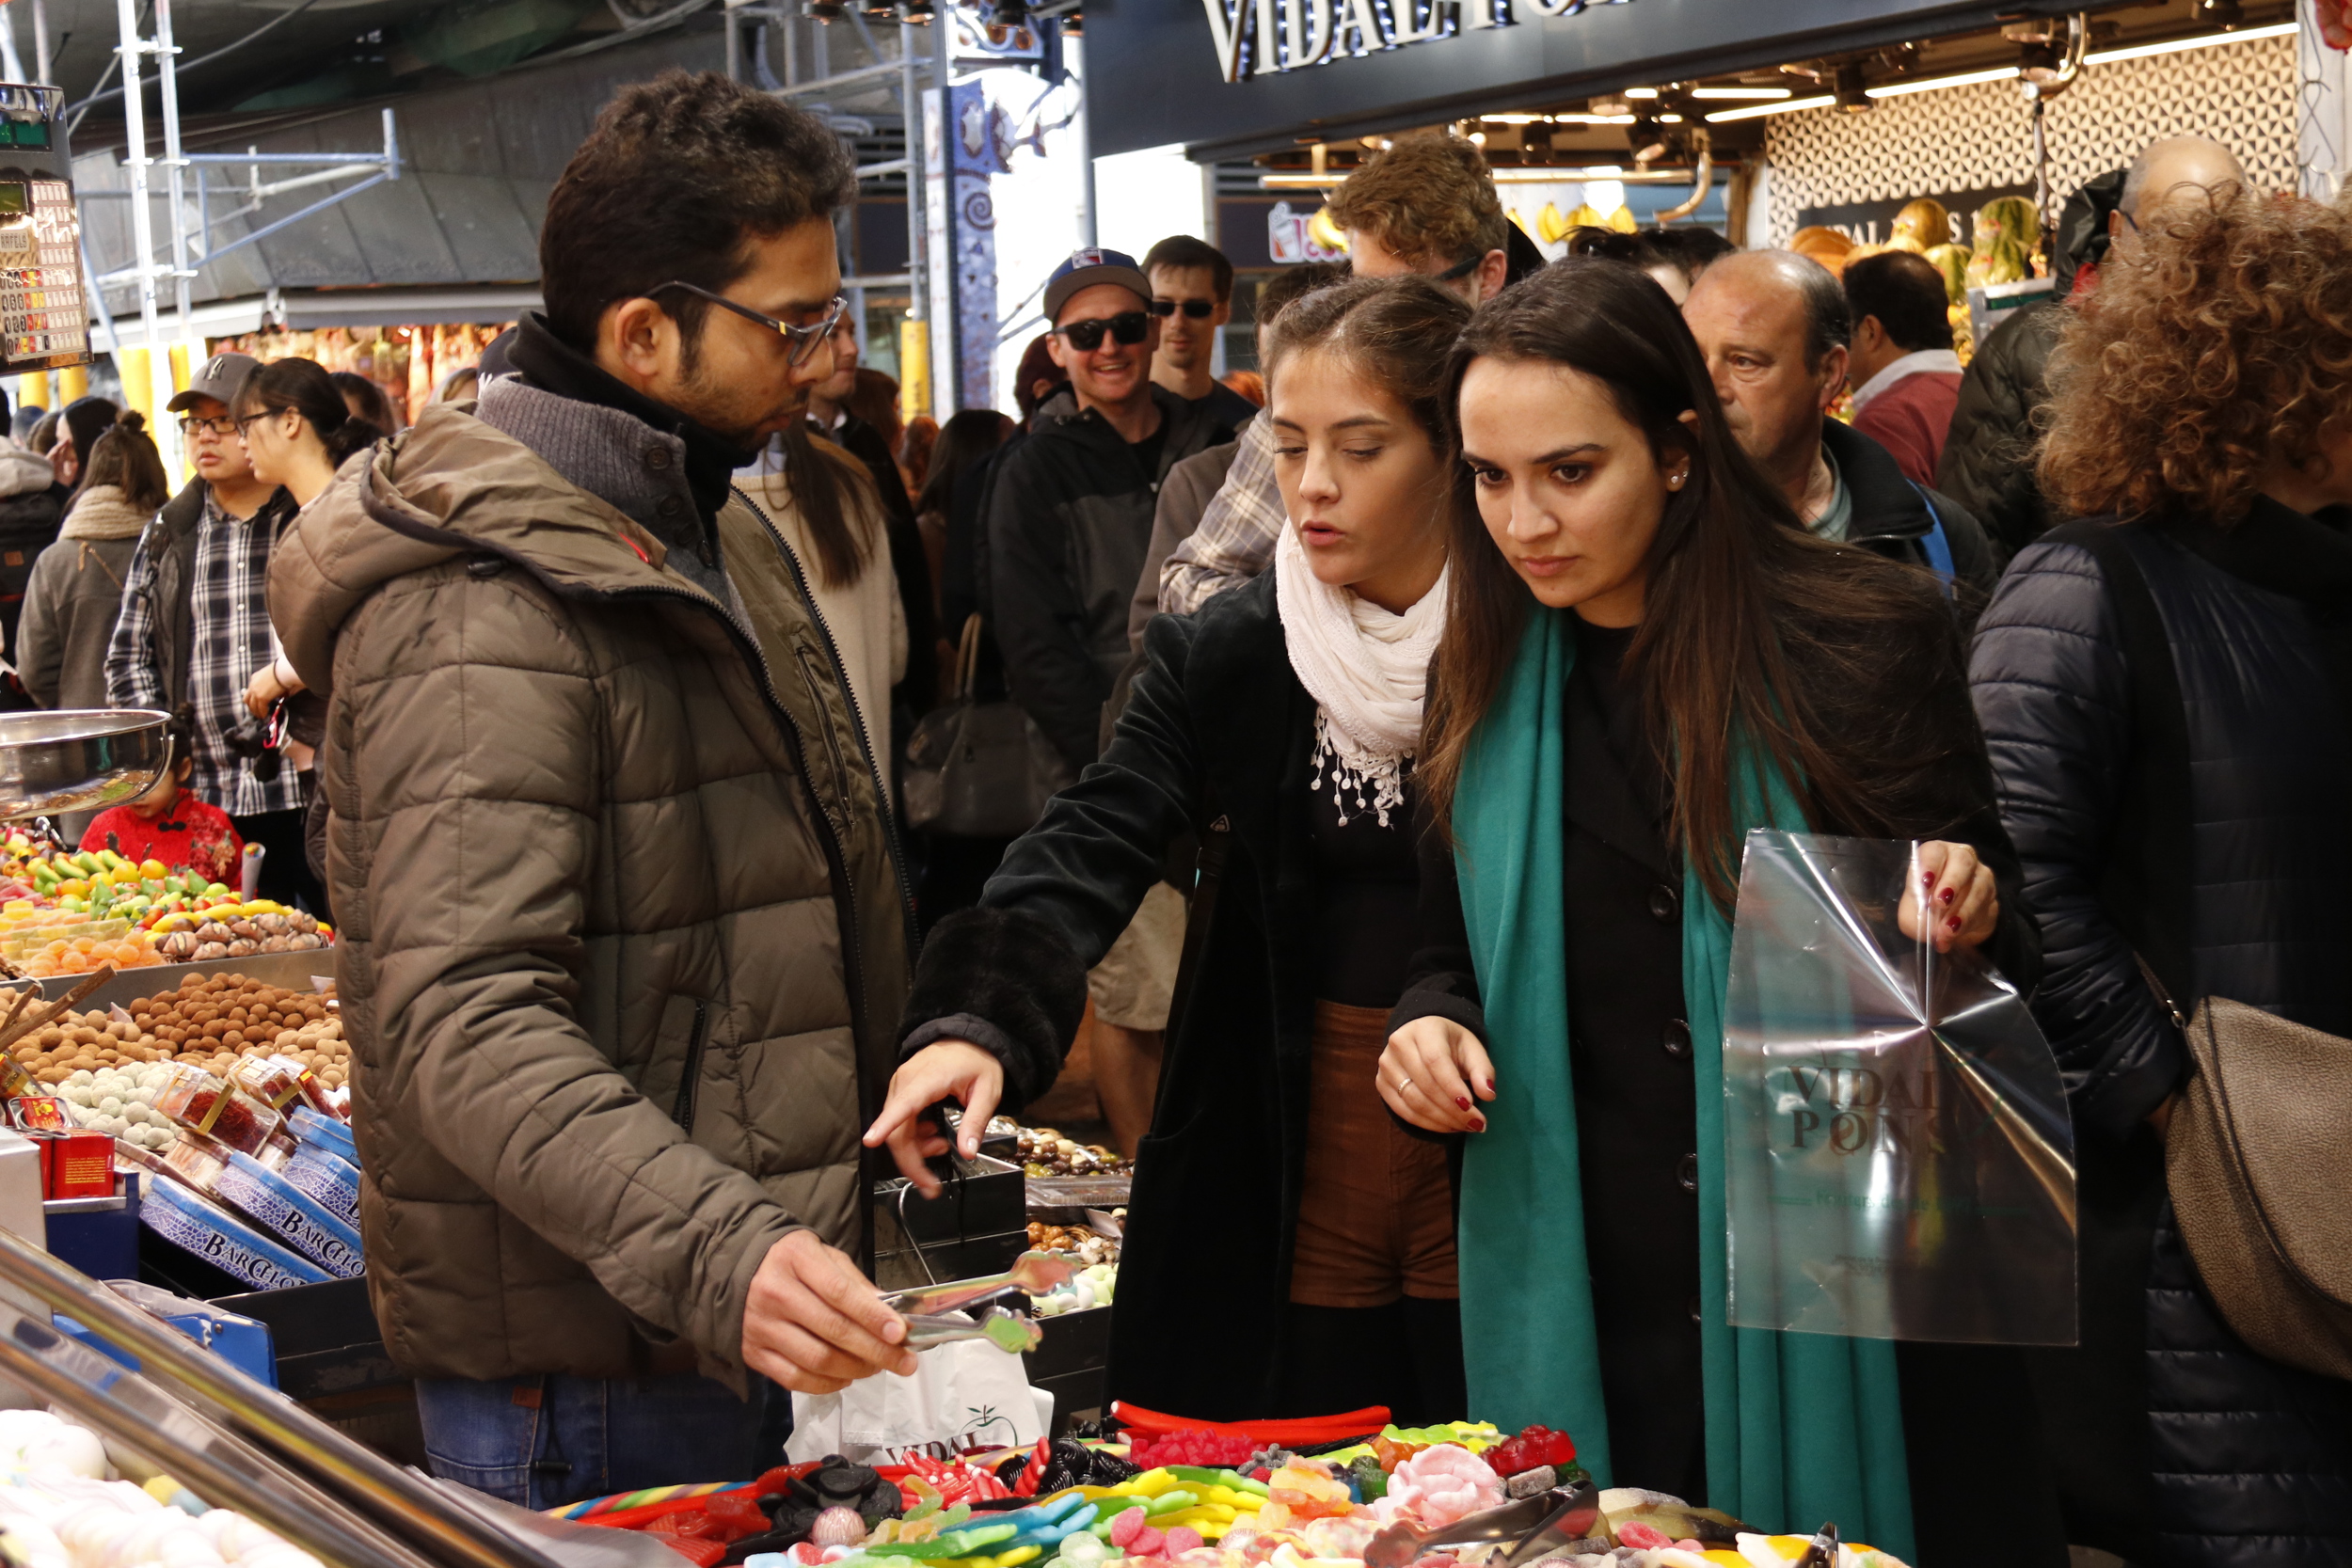 Tourists at the Boqueria market in Barcelona (by ACN)